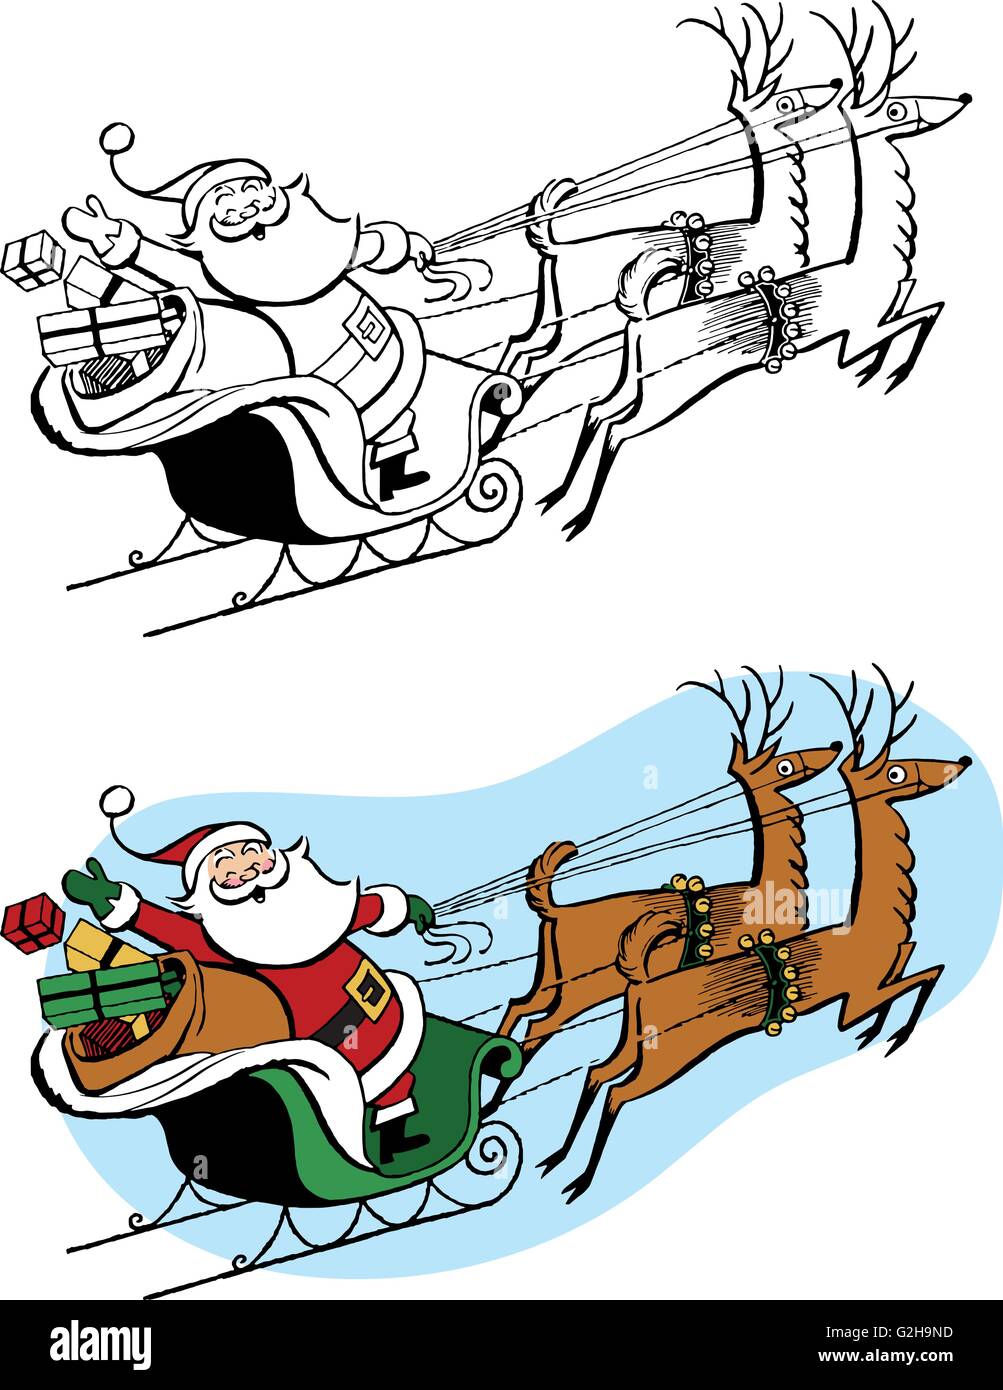 Santa Claus on his flying sleigh with reindeer Stock Vector